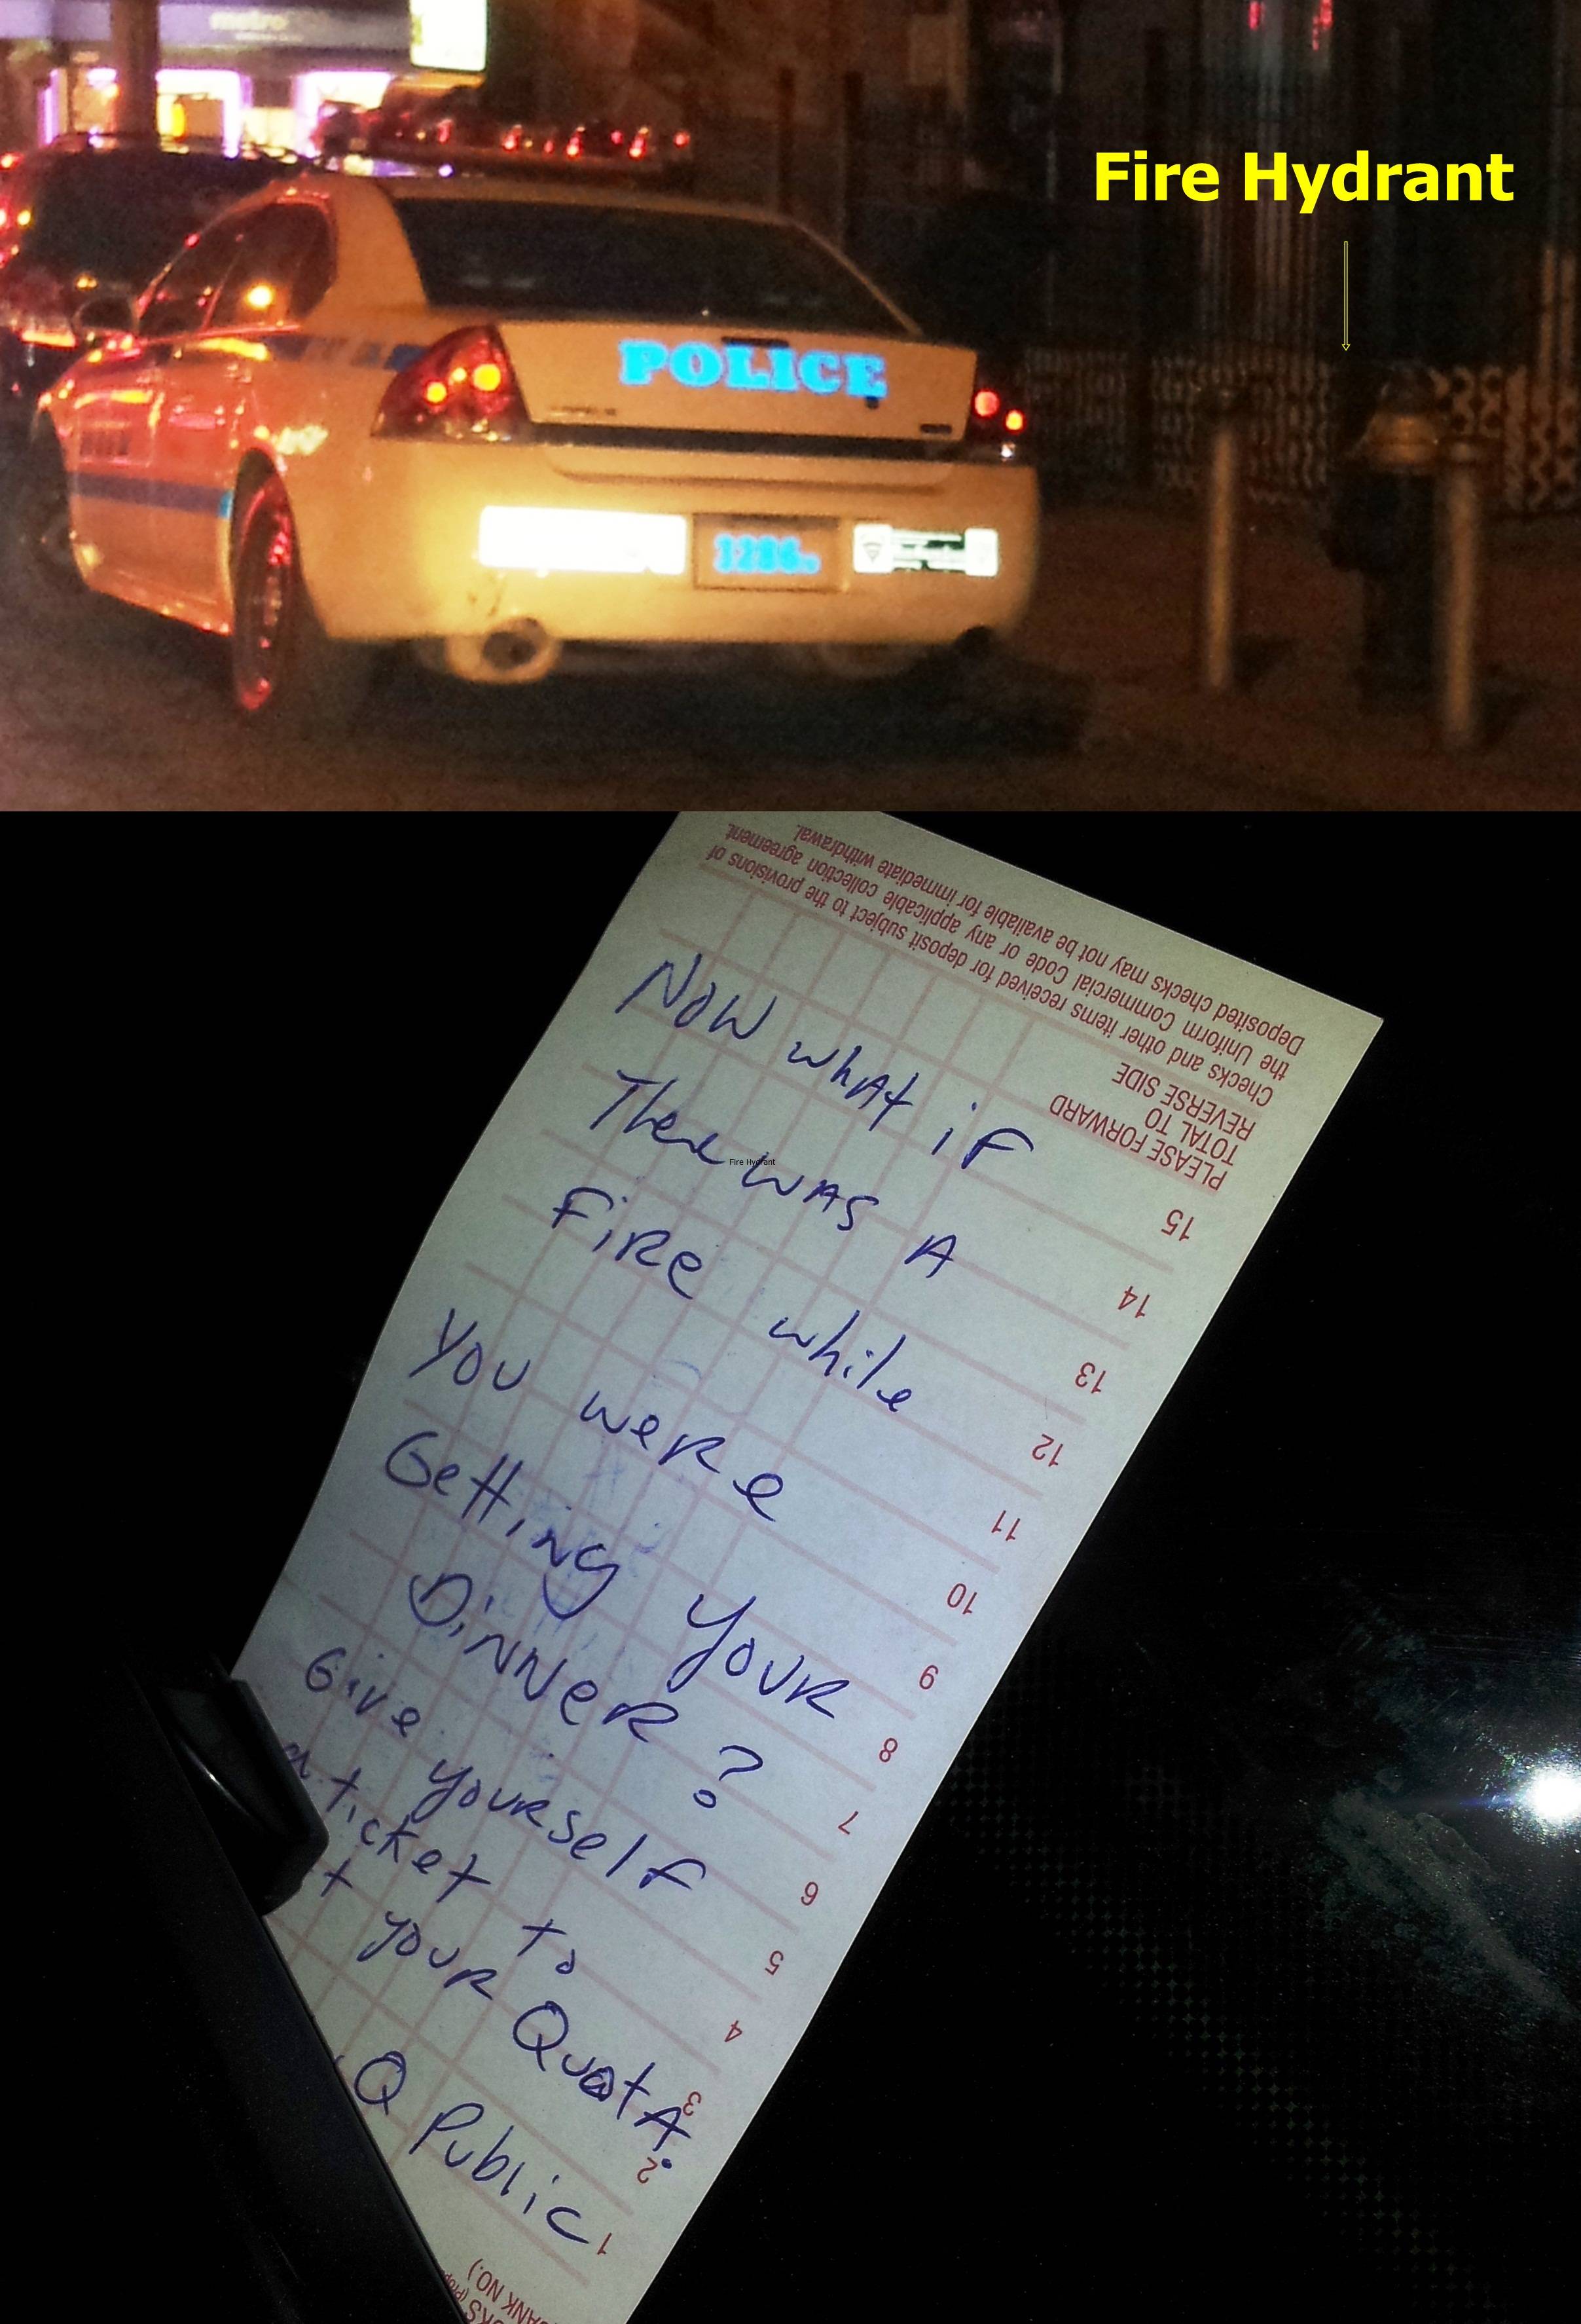 NYPD parked by a fire hydrant, so I gave him a citation.